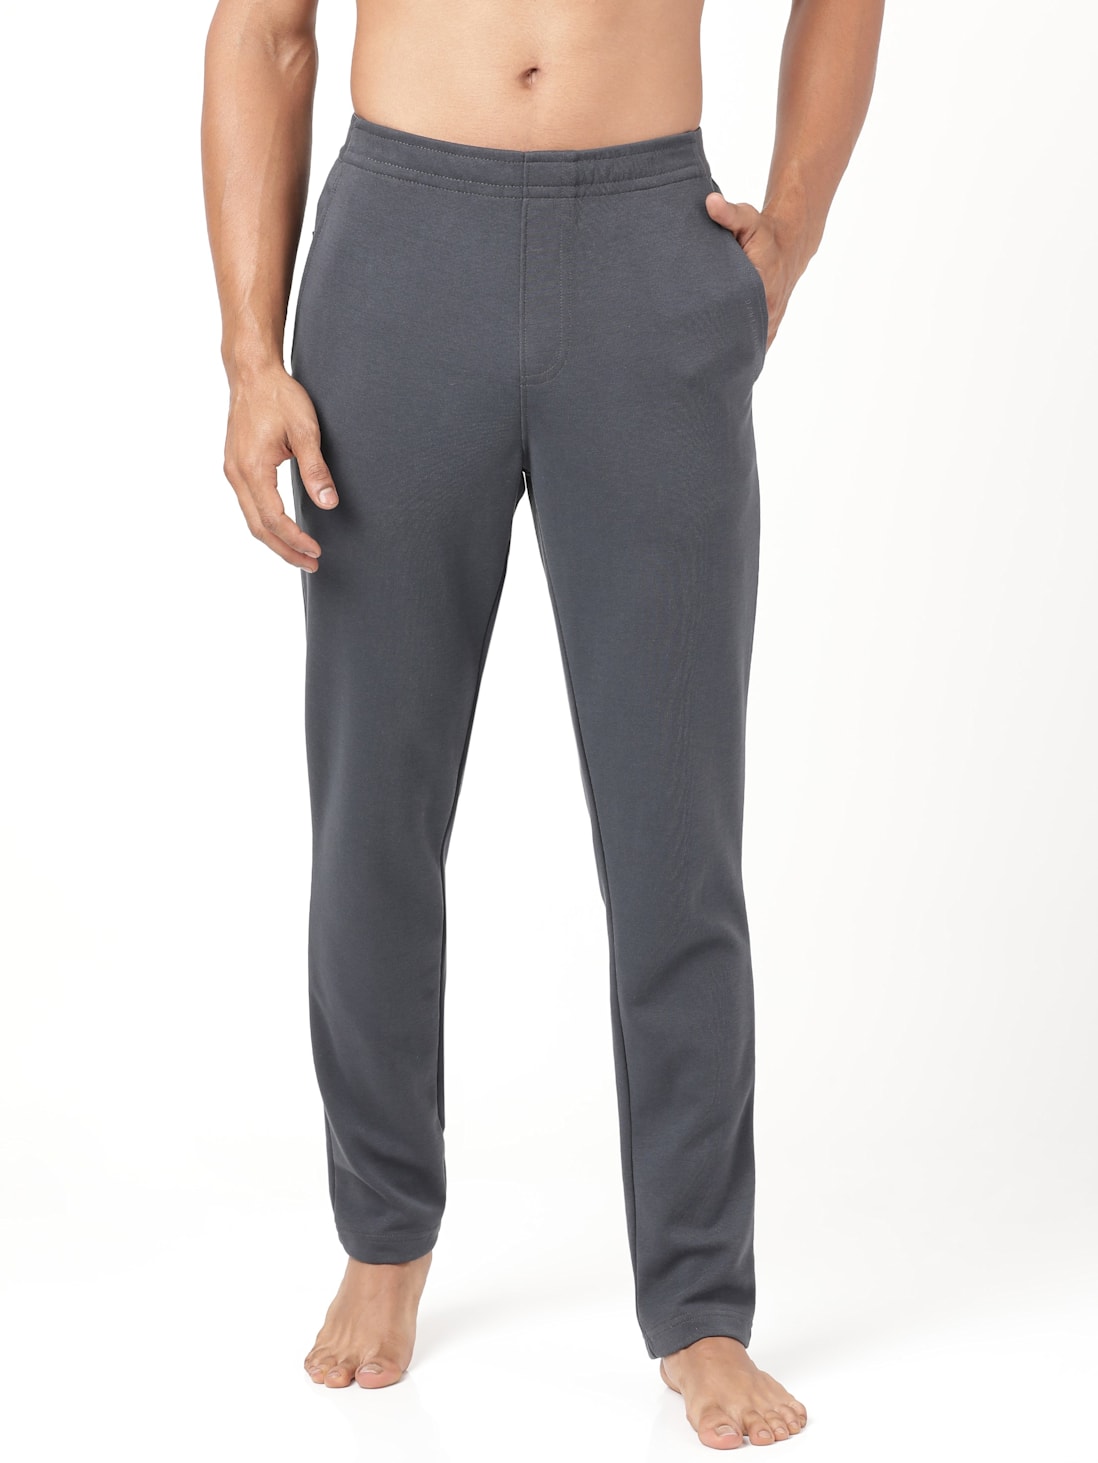 New Jockey Track Pant for Woman 90 cm size M | Pants for women, Leisure  wear, Clothes design